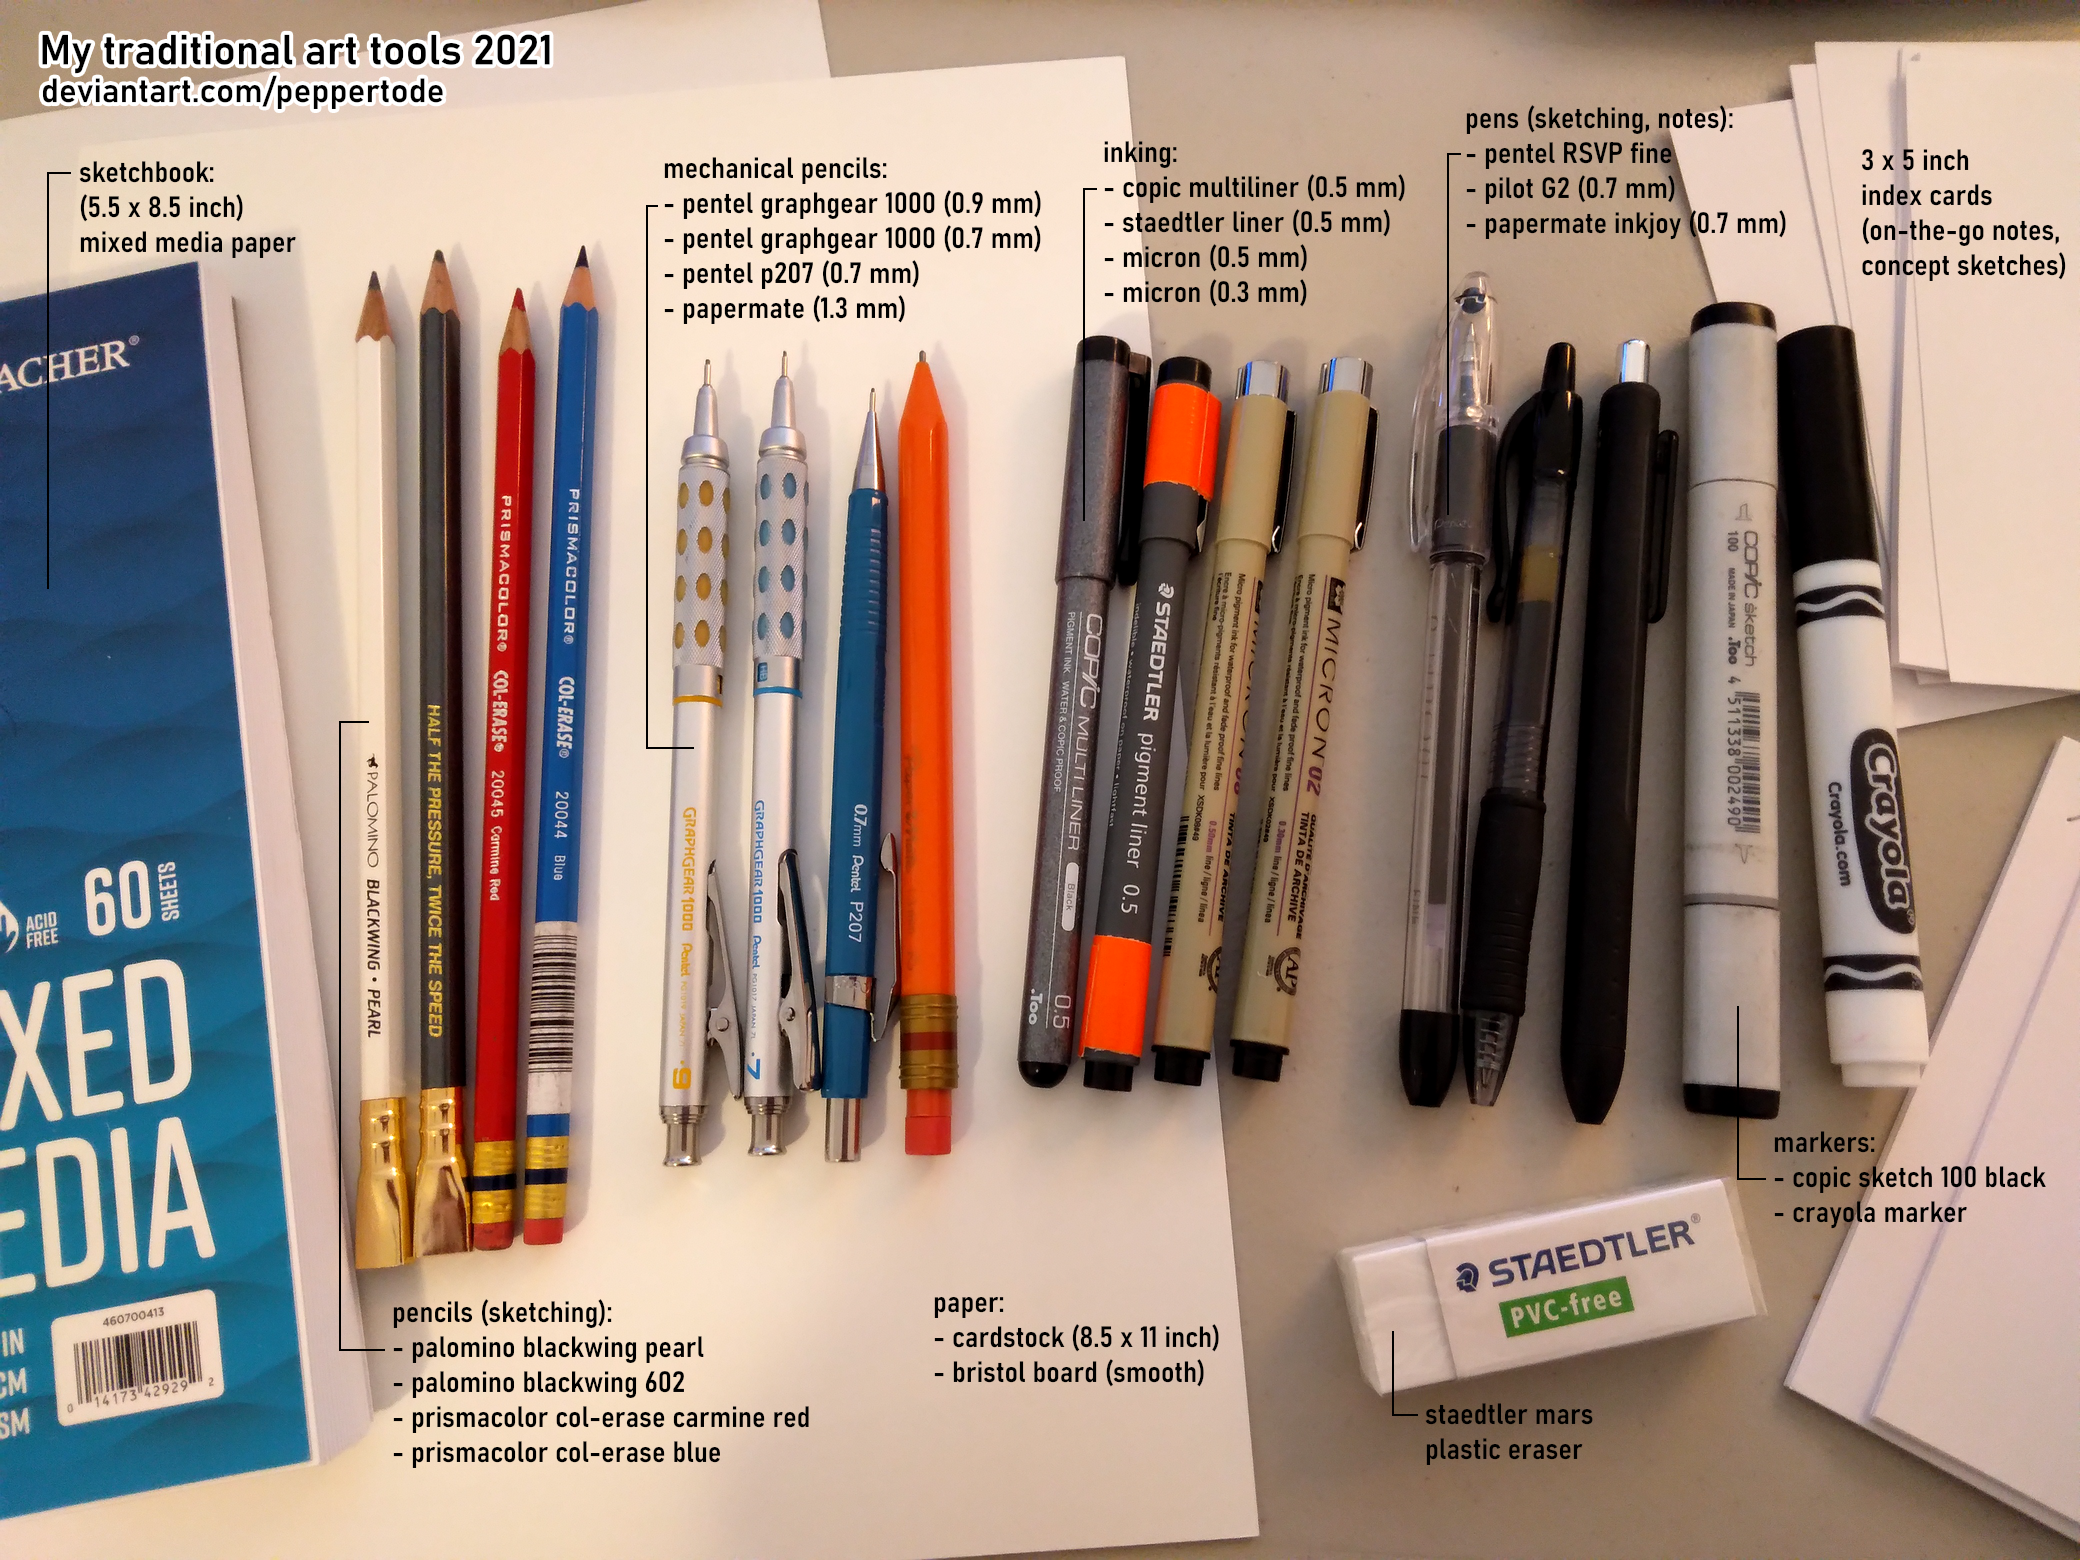 My traditional art tools 2021 by PEPPERTODE on DeviantArt